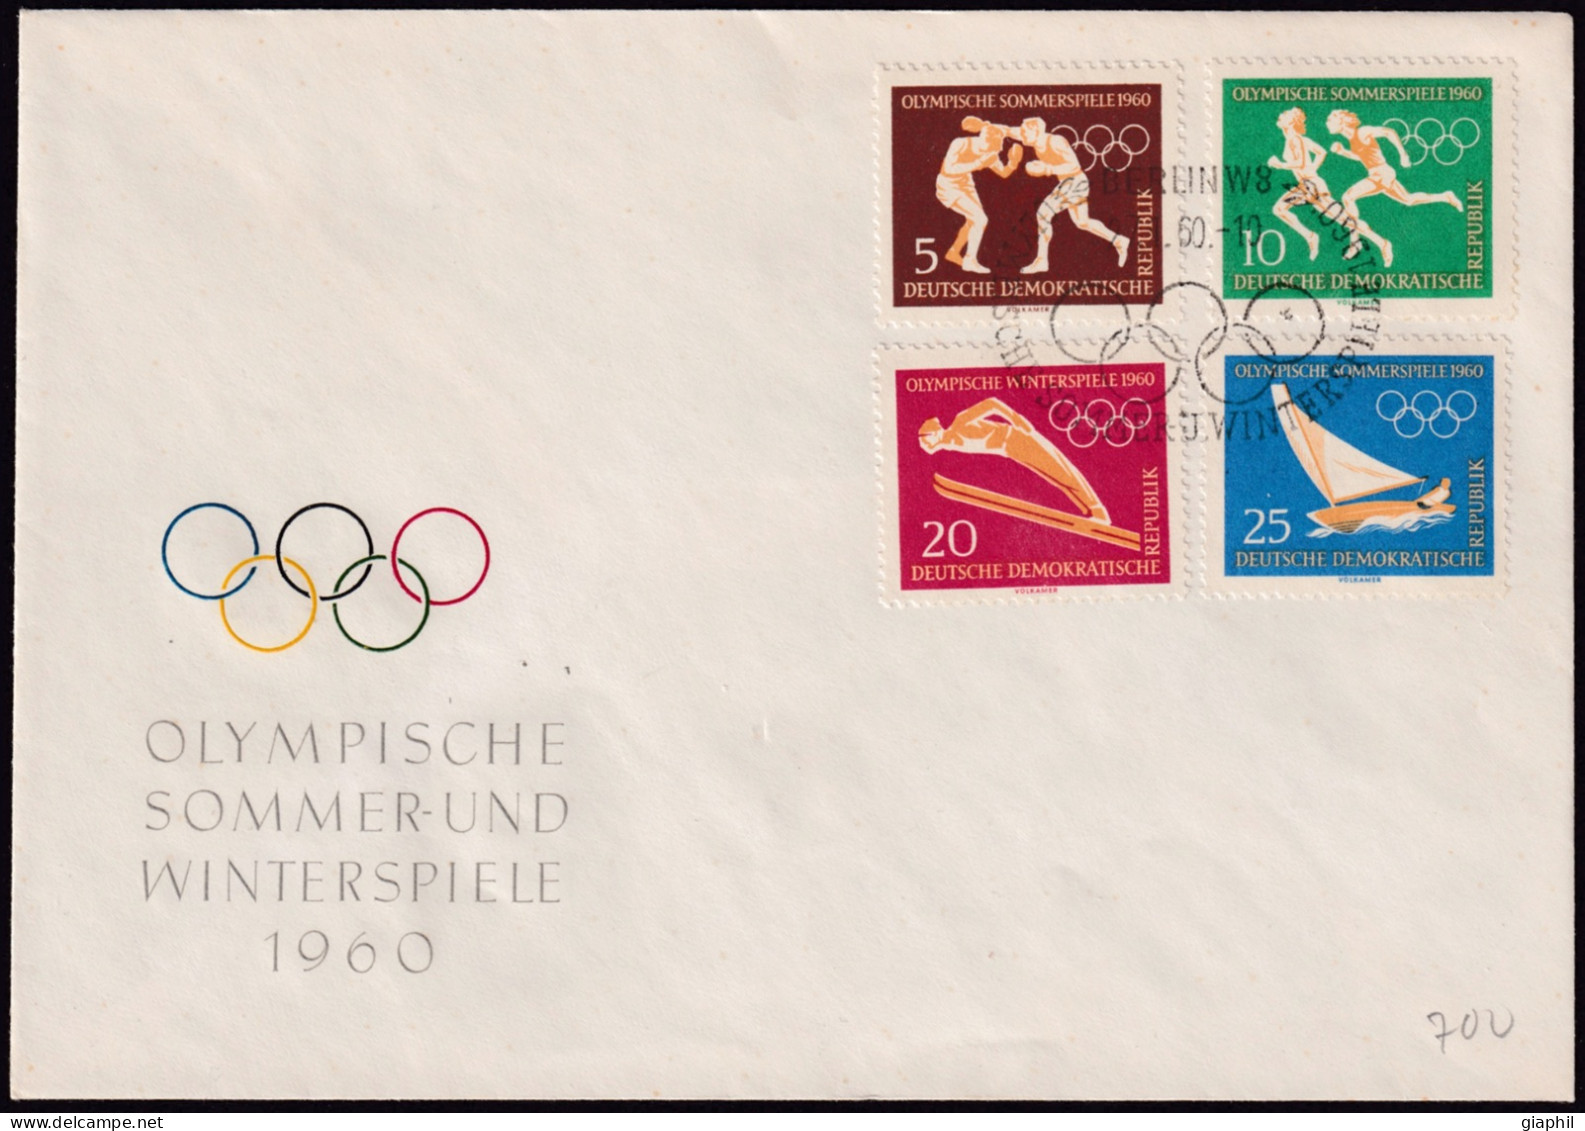 GERMANY EAST - DDR 1960 FDC ROME OLYMPIC GAMES (Mi. 746-749)  OFFER! - Sommer 1960: Rom